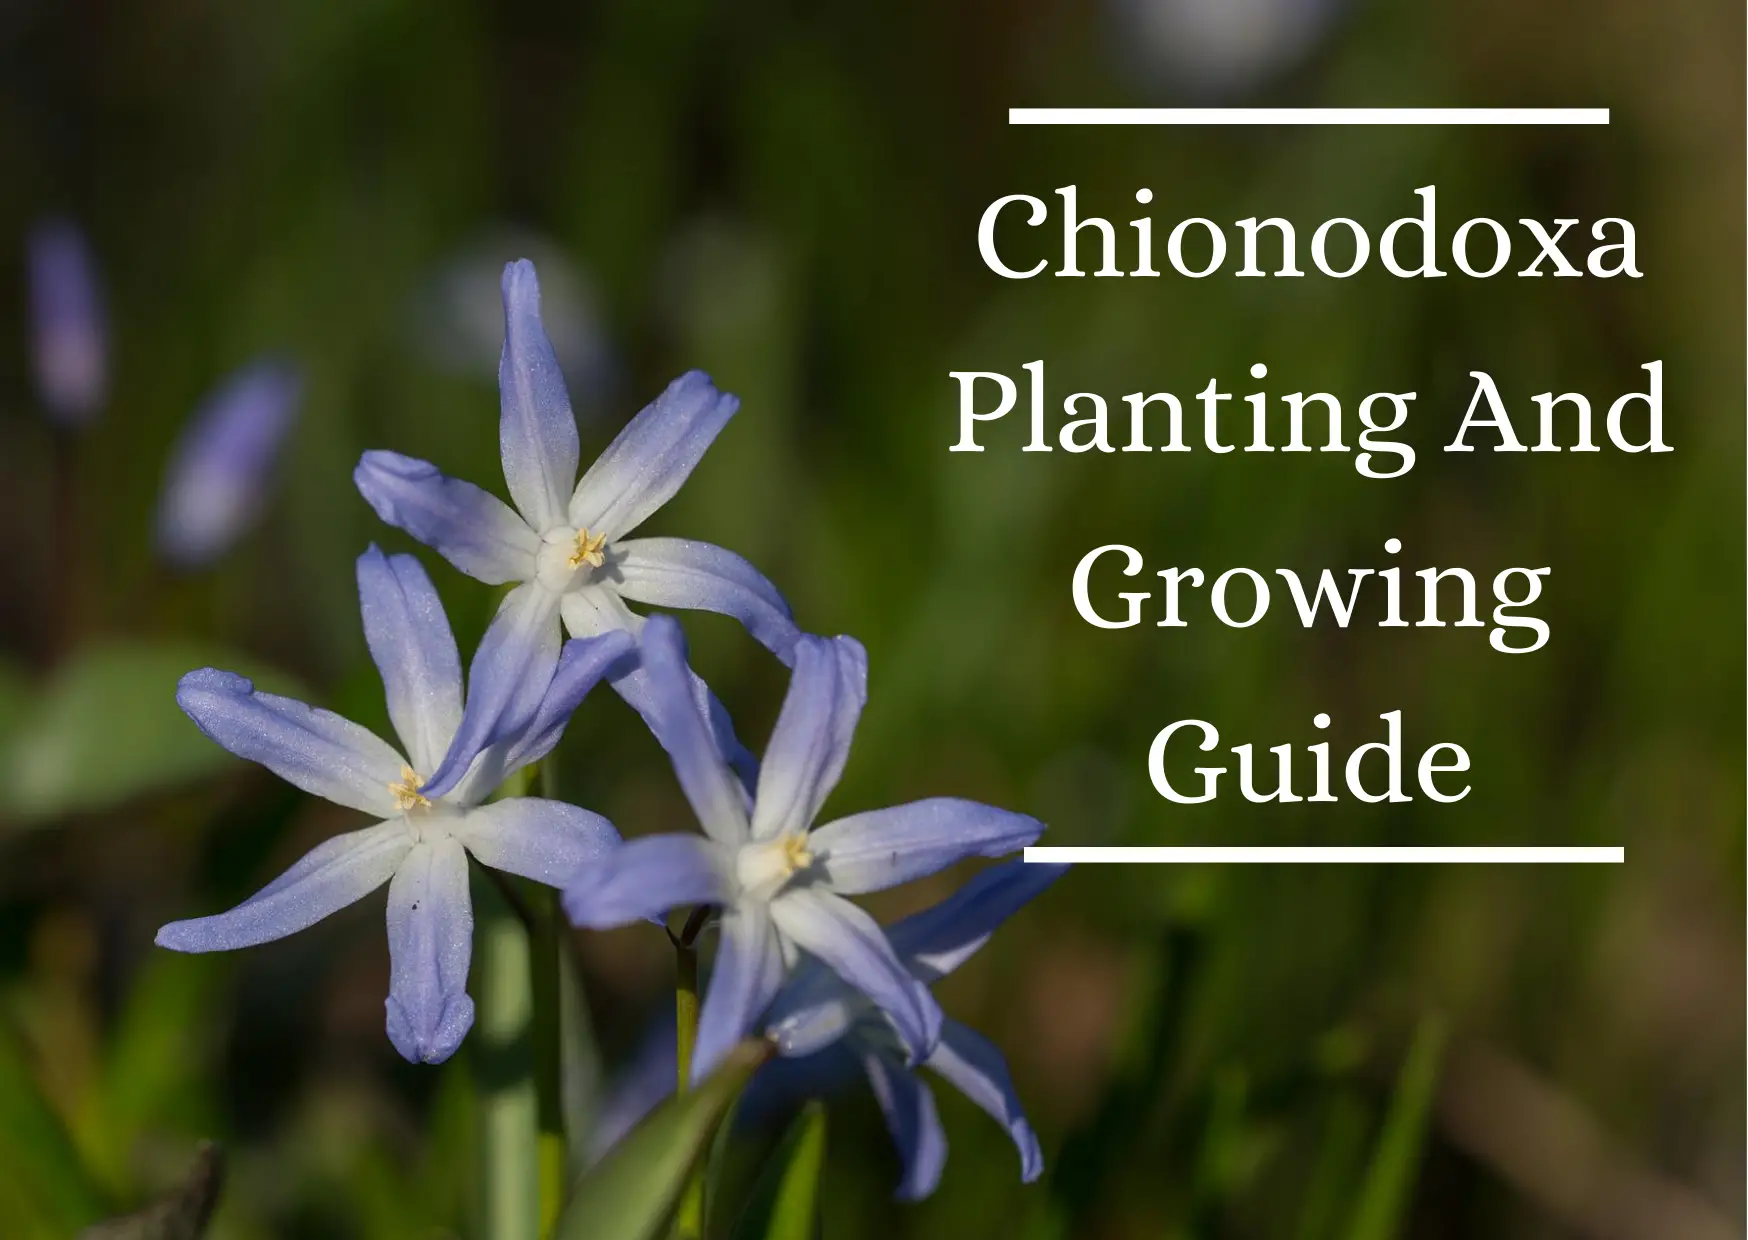 Chionodoxa Planting And Growing Guide